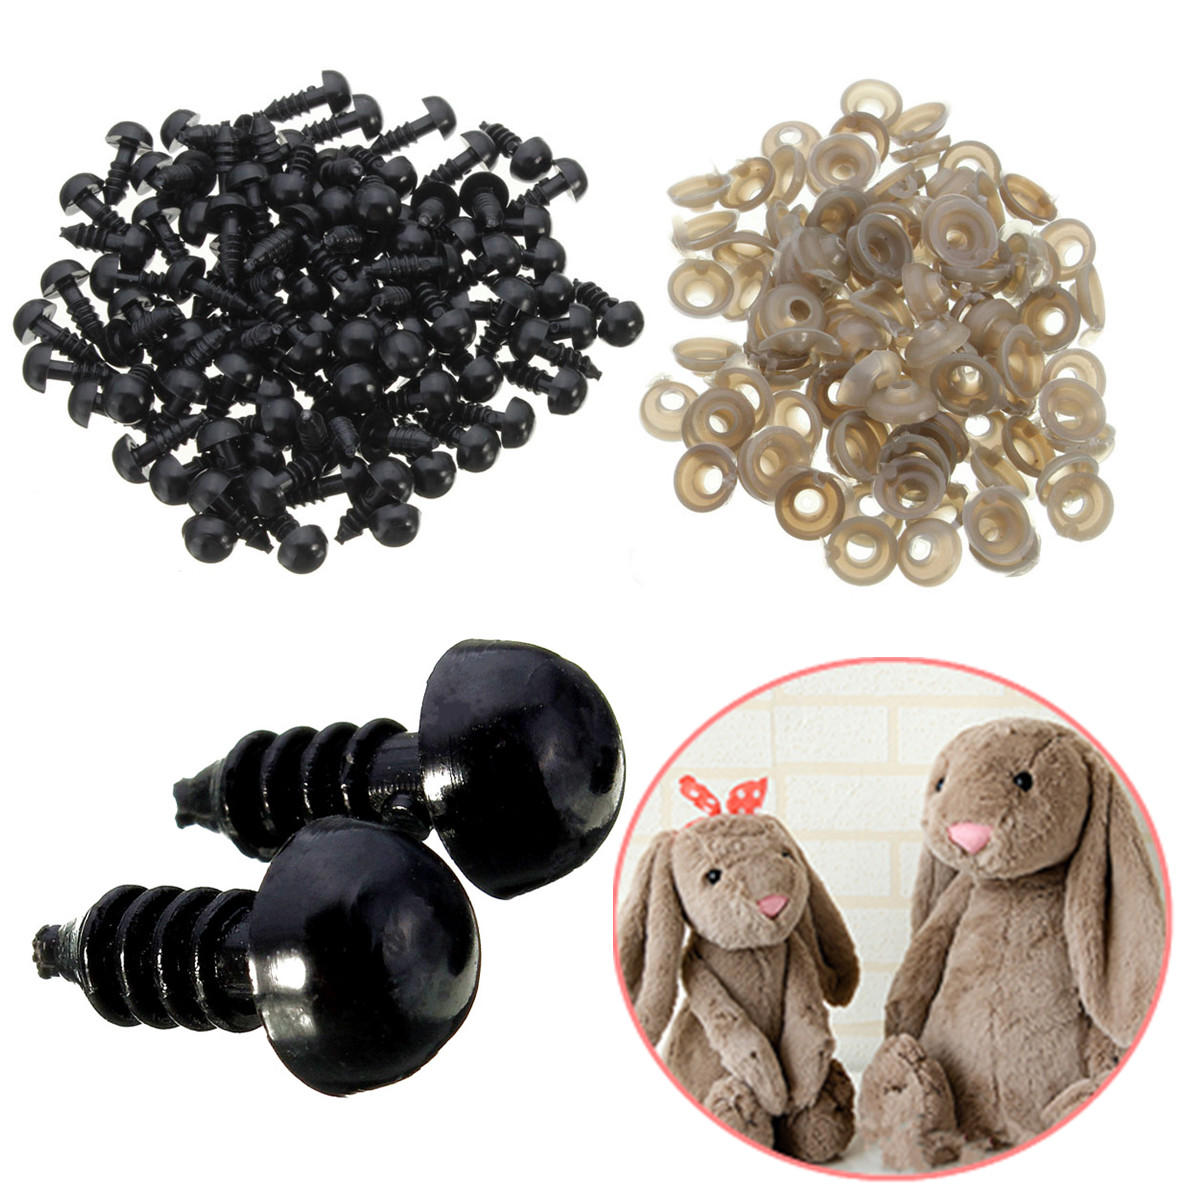 

100Pcs Toys Eyes Washers Black Plastic Safety Eyes For Teddy Bear Doll Animal Puppet Crafts Accessories